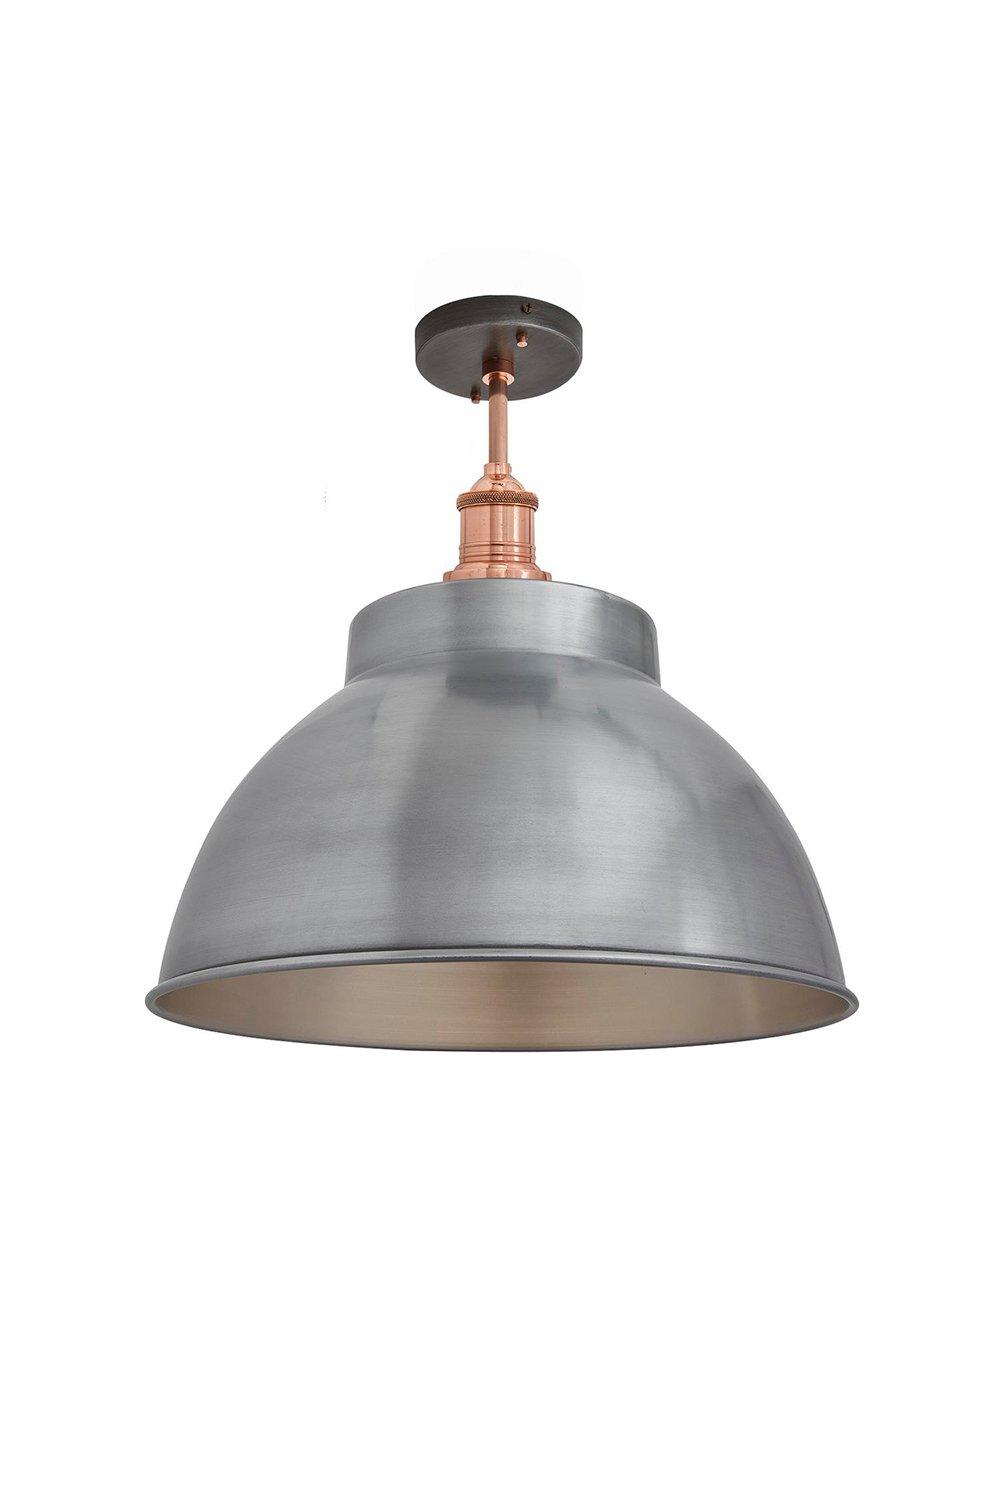 Brooklyn Dome Flush Mount, 13 Inch, Light Pewter, Copper Holder